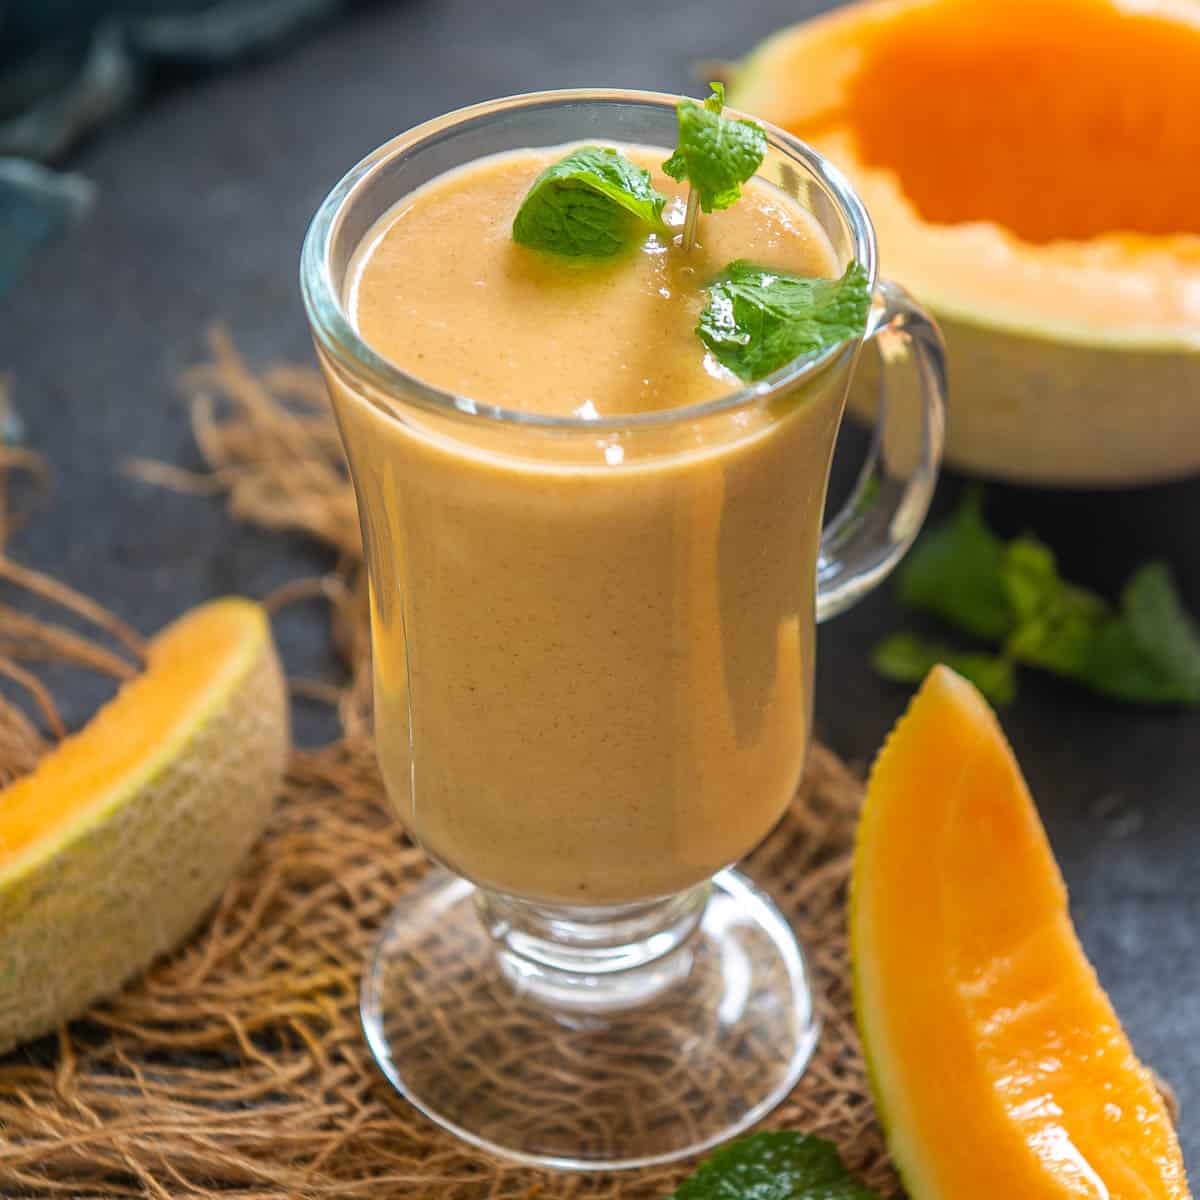 Cantaloupe Smoothie Recipe (Step by Step + Video) - Whiskaffair